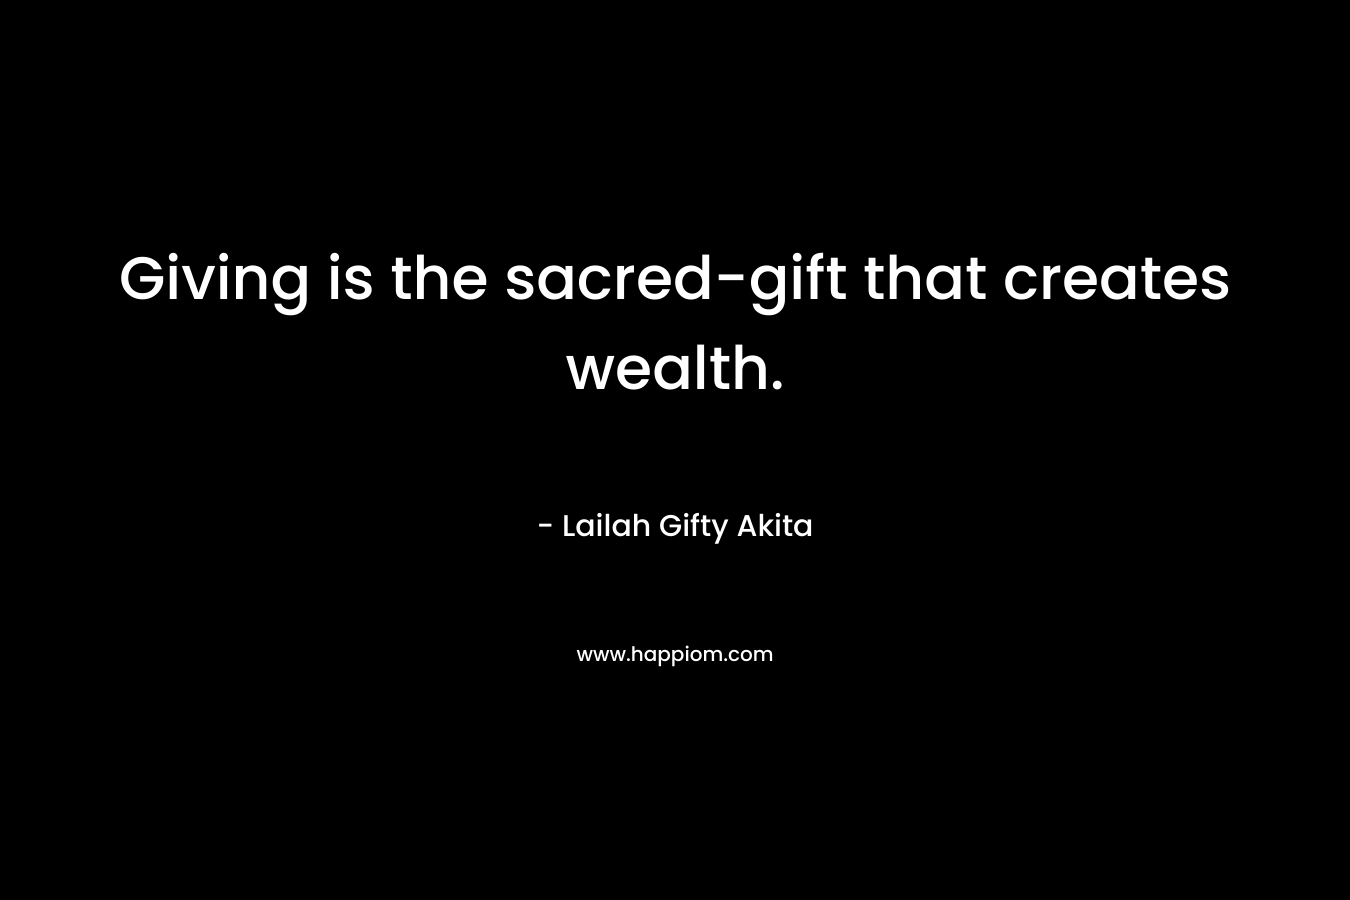 Giving is the sacred-gift that creates wealth.